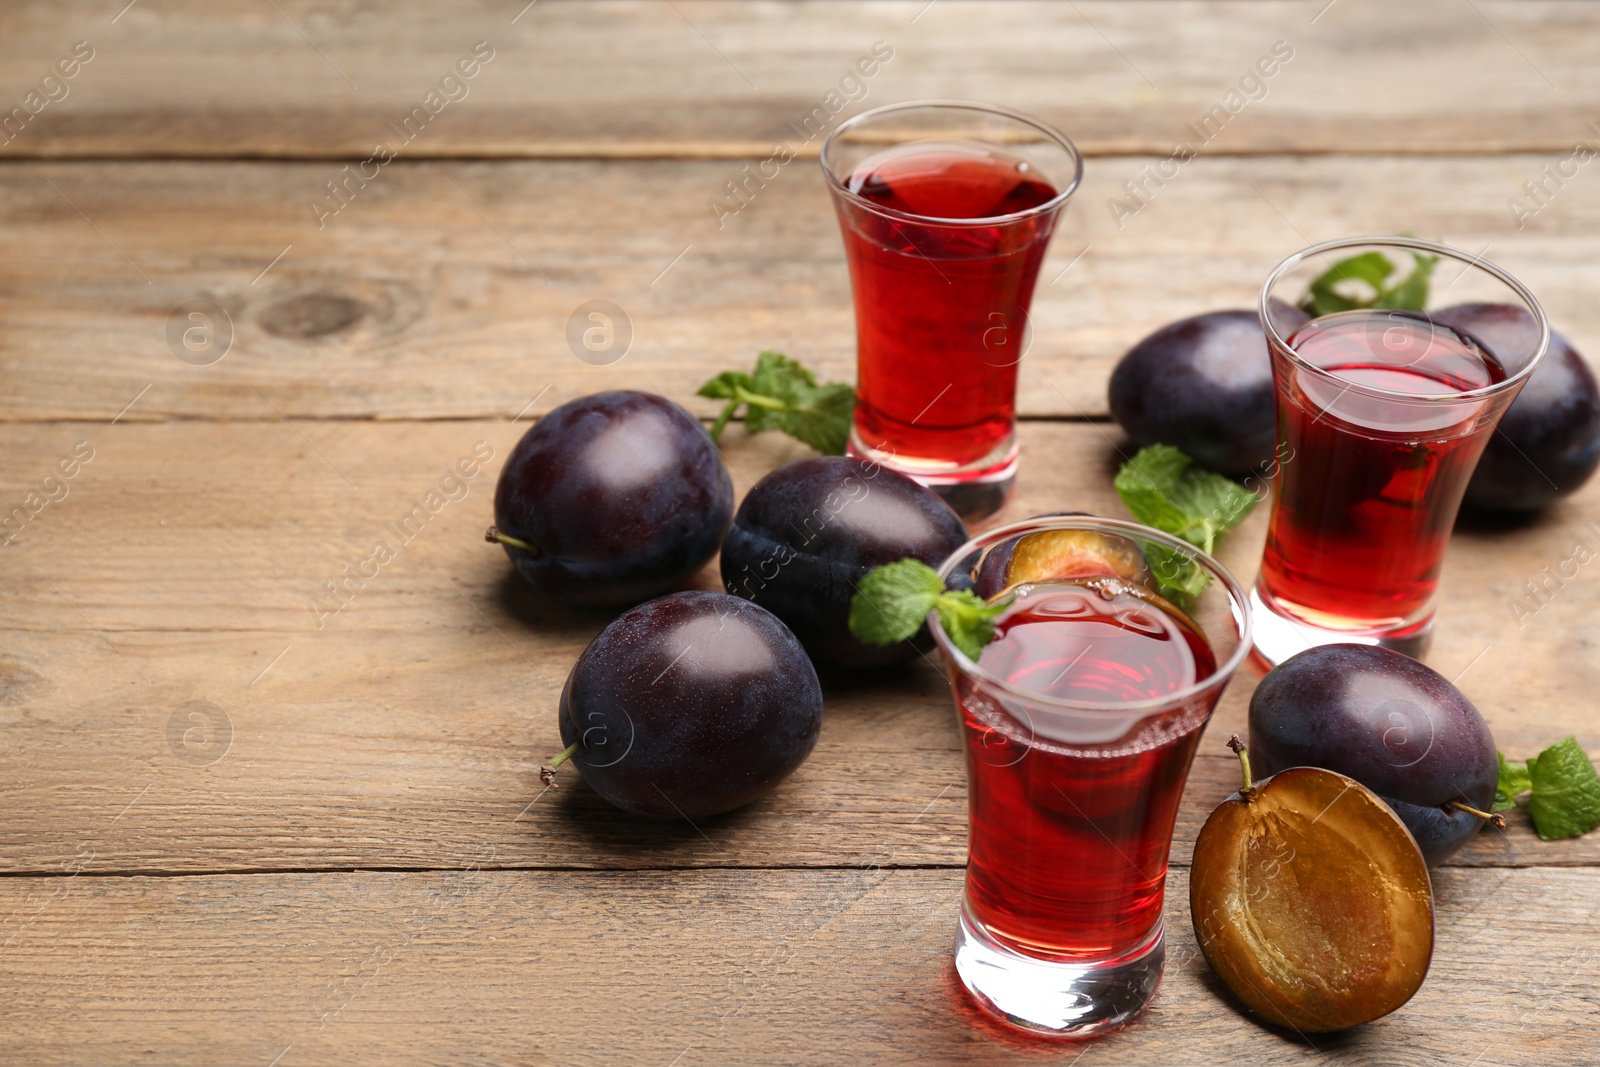 Photo of Delicious plum liquor, mint and ripe fruits on wooden table. Homemade strong alcoholic beverage